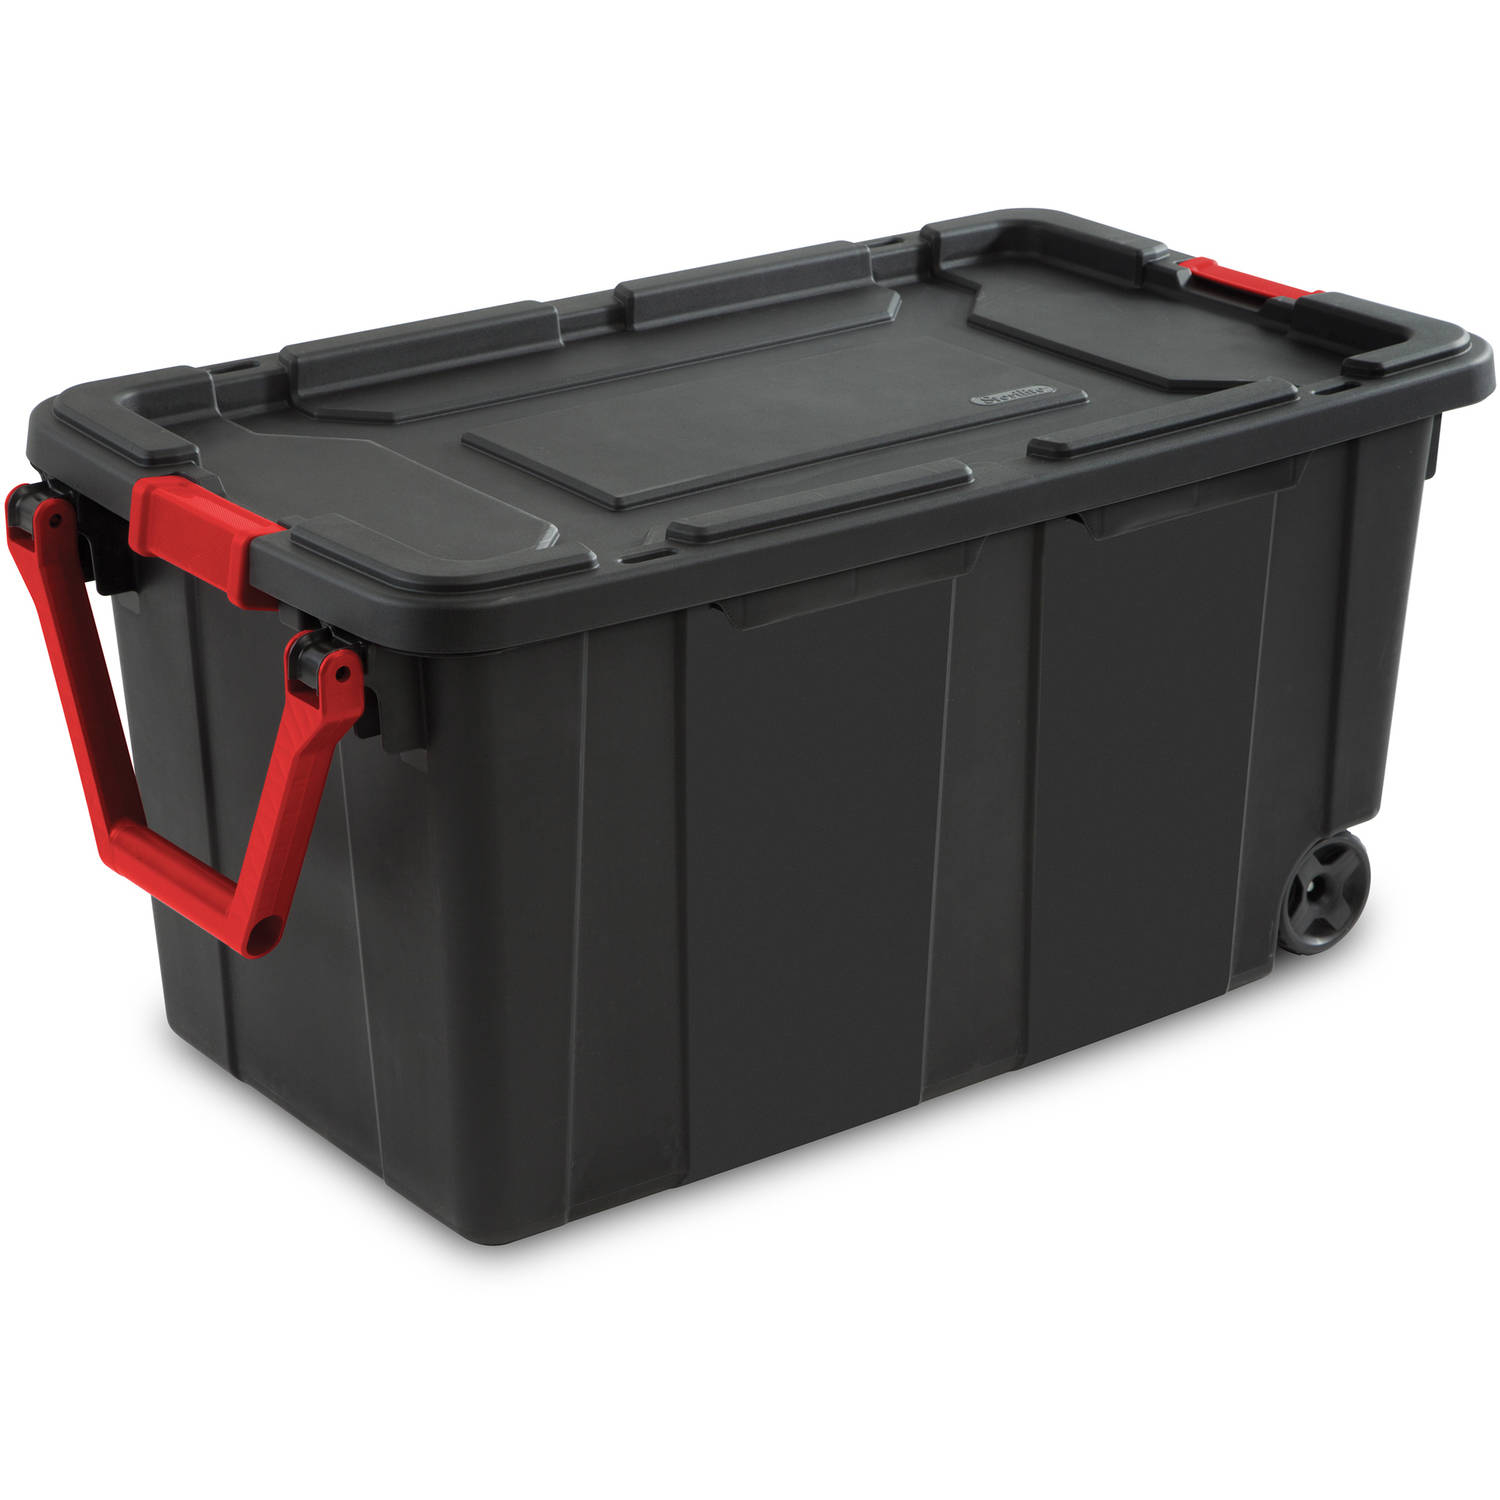 New Sterilite 40 Gallon Wheeled Industrial Tote Black Case Of 2 throughout proportions 1500 X 1500